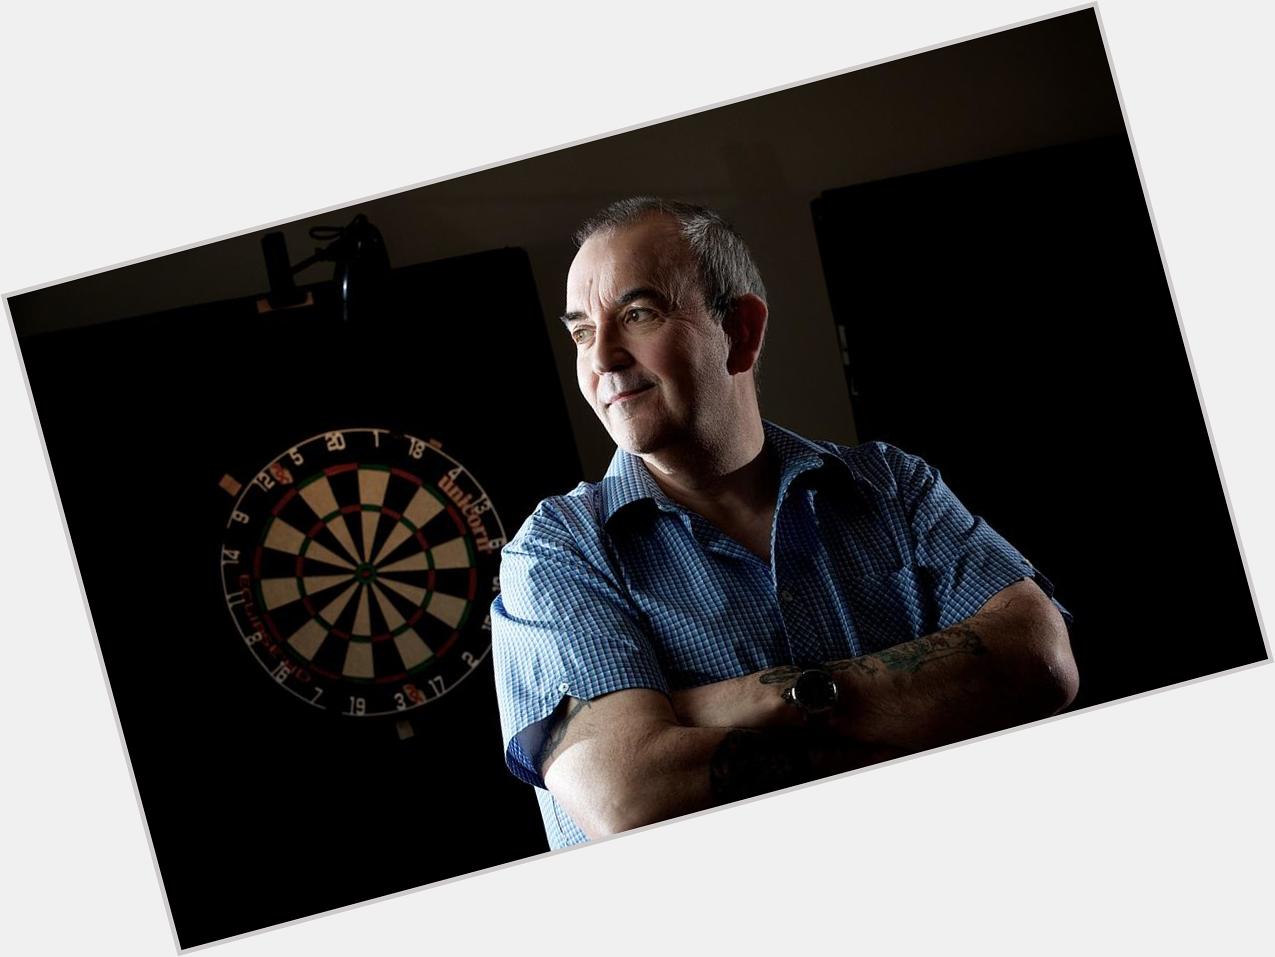 On this day in 1960, a man was born who would change the game of darts forever.
Happy birthday, Phil Taylor. 